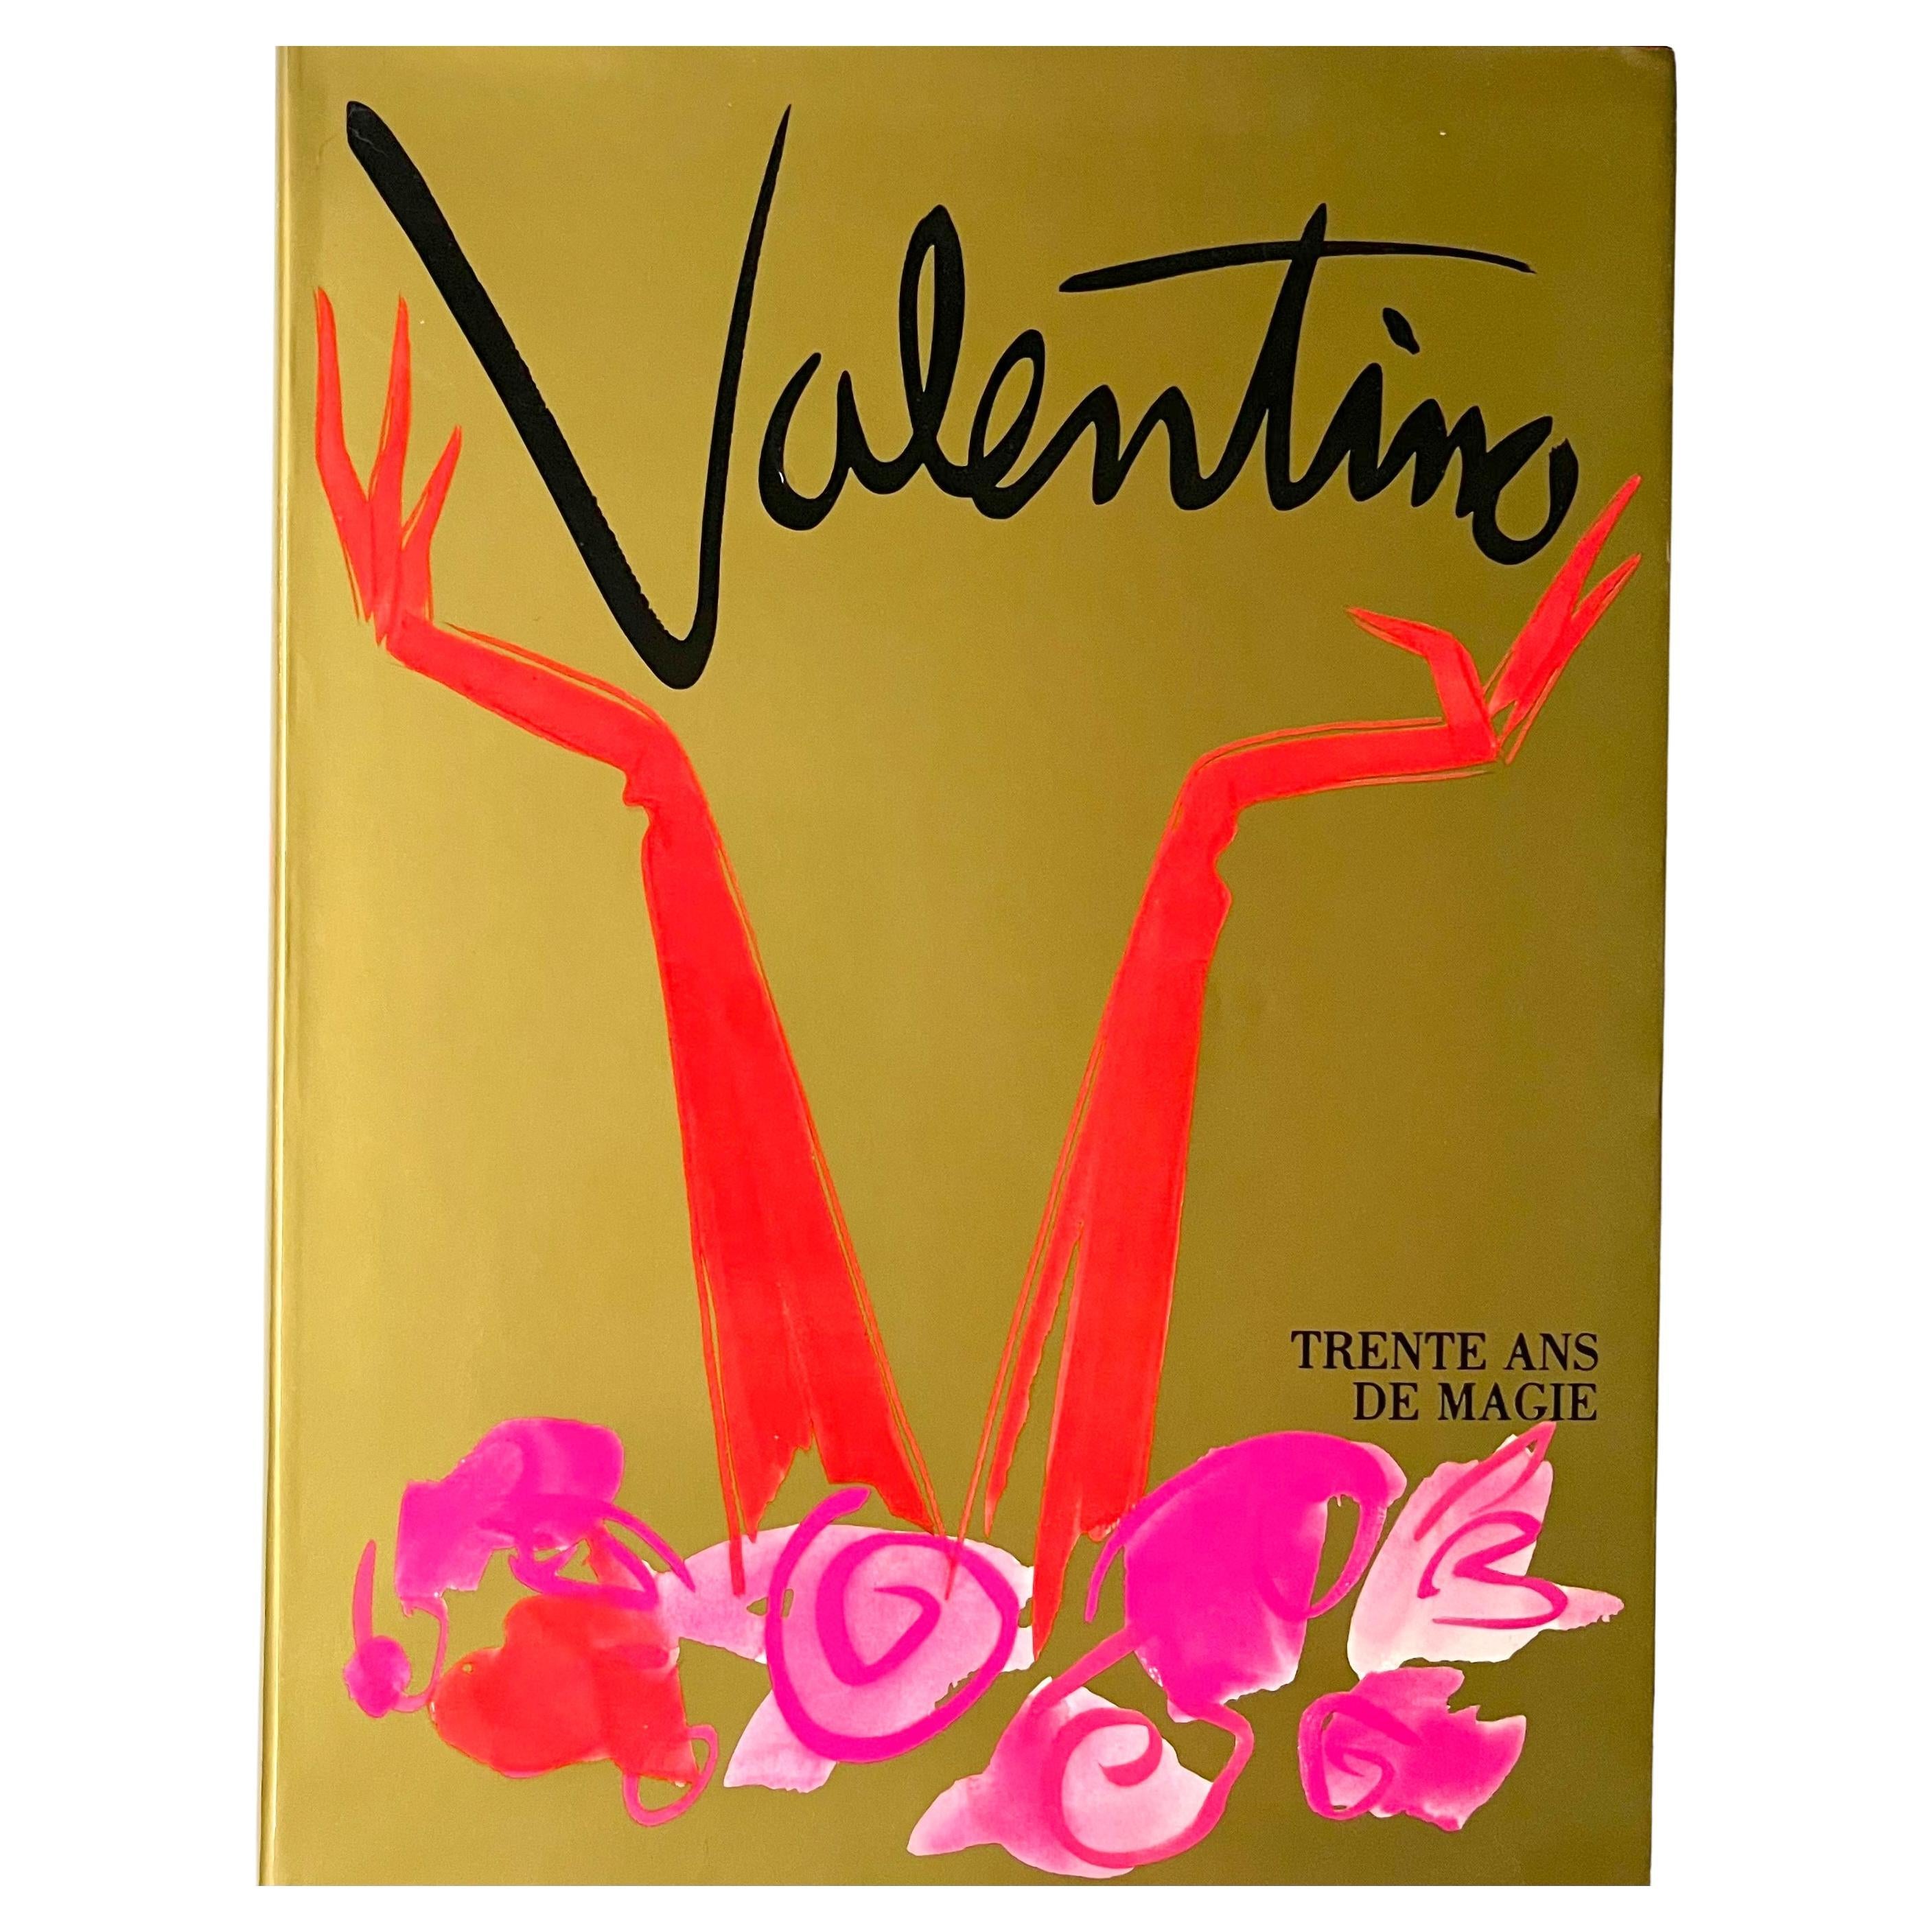 Valentino Trente Ans de Magie 1st French Edition 1991 For Sale